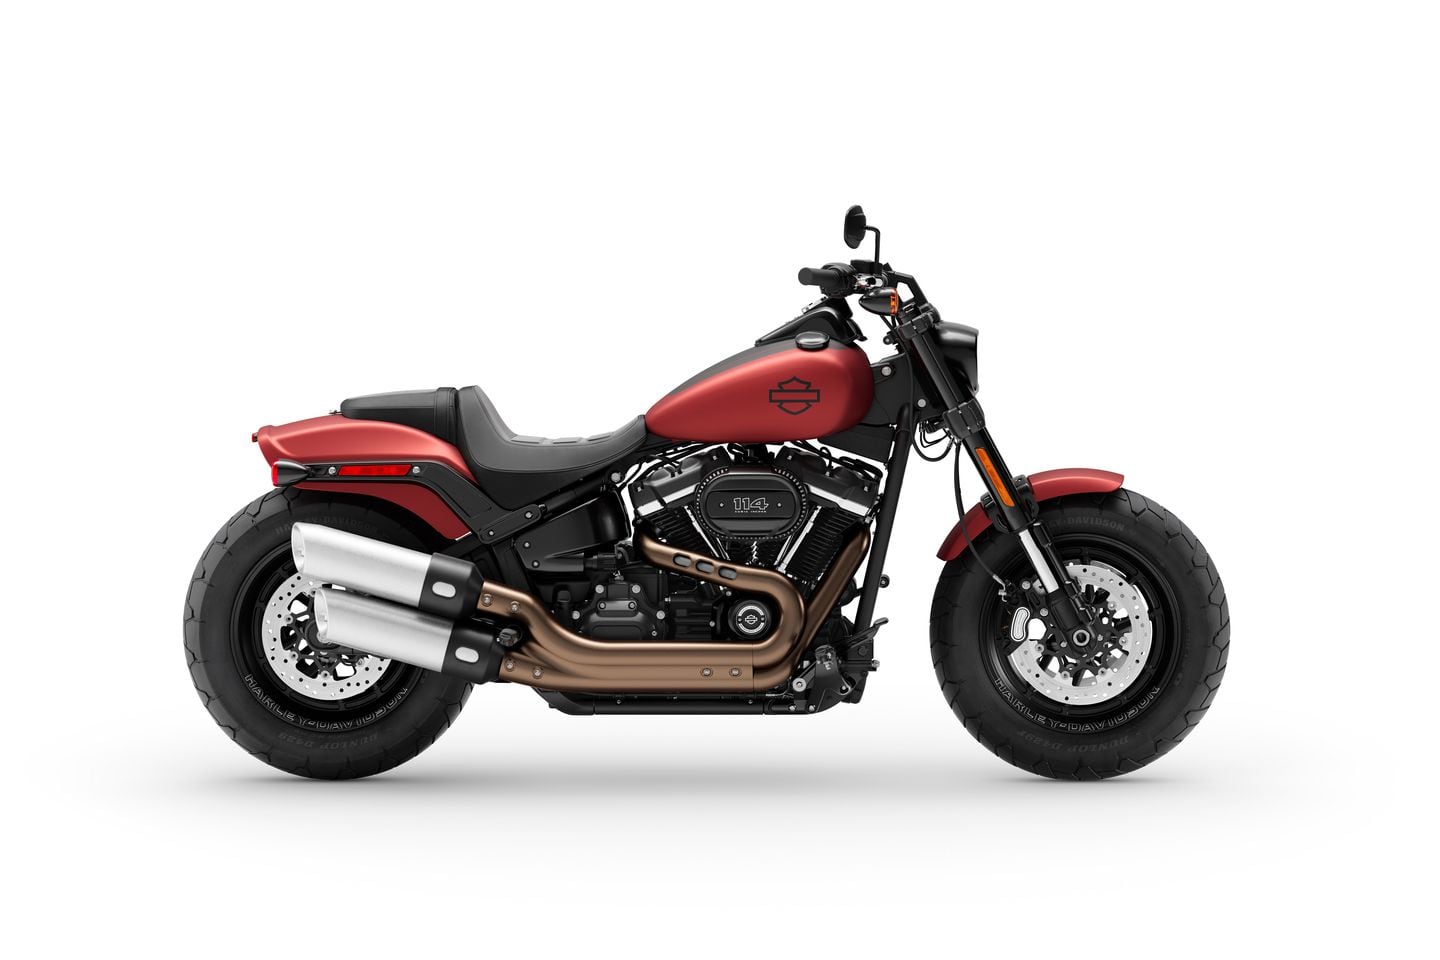 Harley Davidson Fat Bob Buyer S Guide Specs Photos Price Cycle World